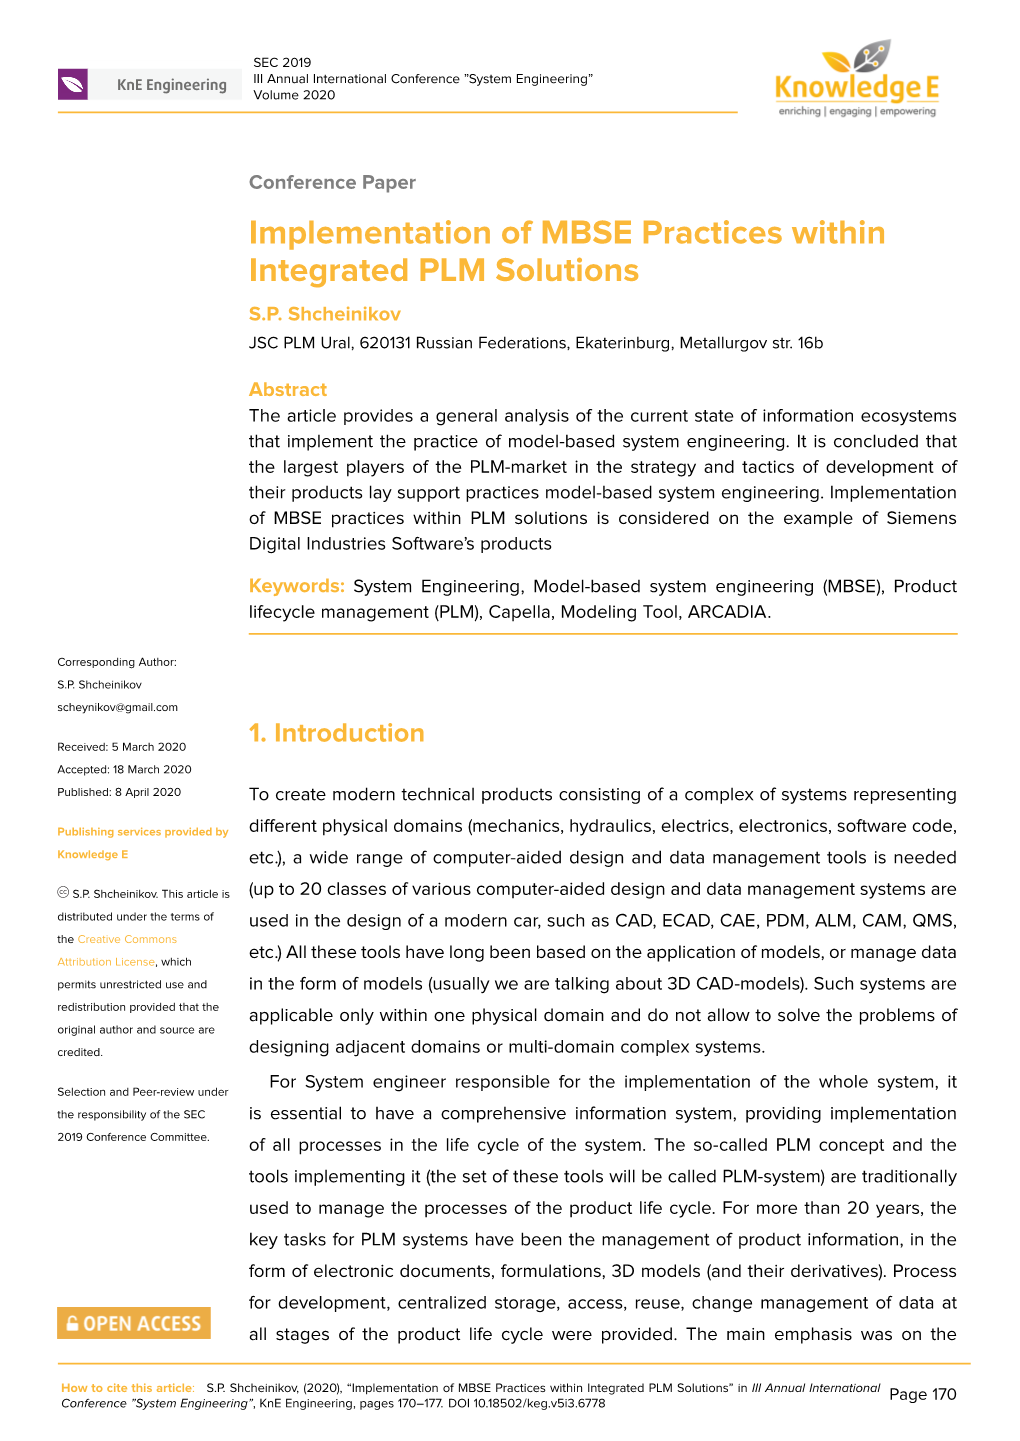 Implementation of MBSE Practices Within Integrated PLM Solutions S.P